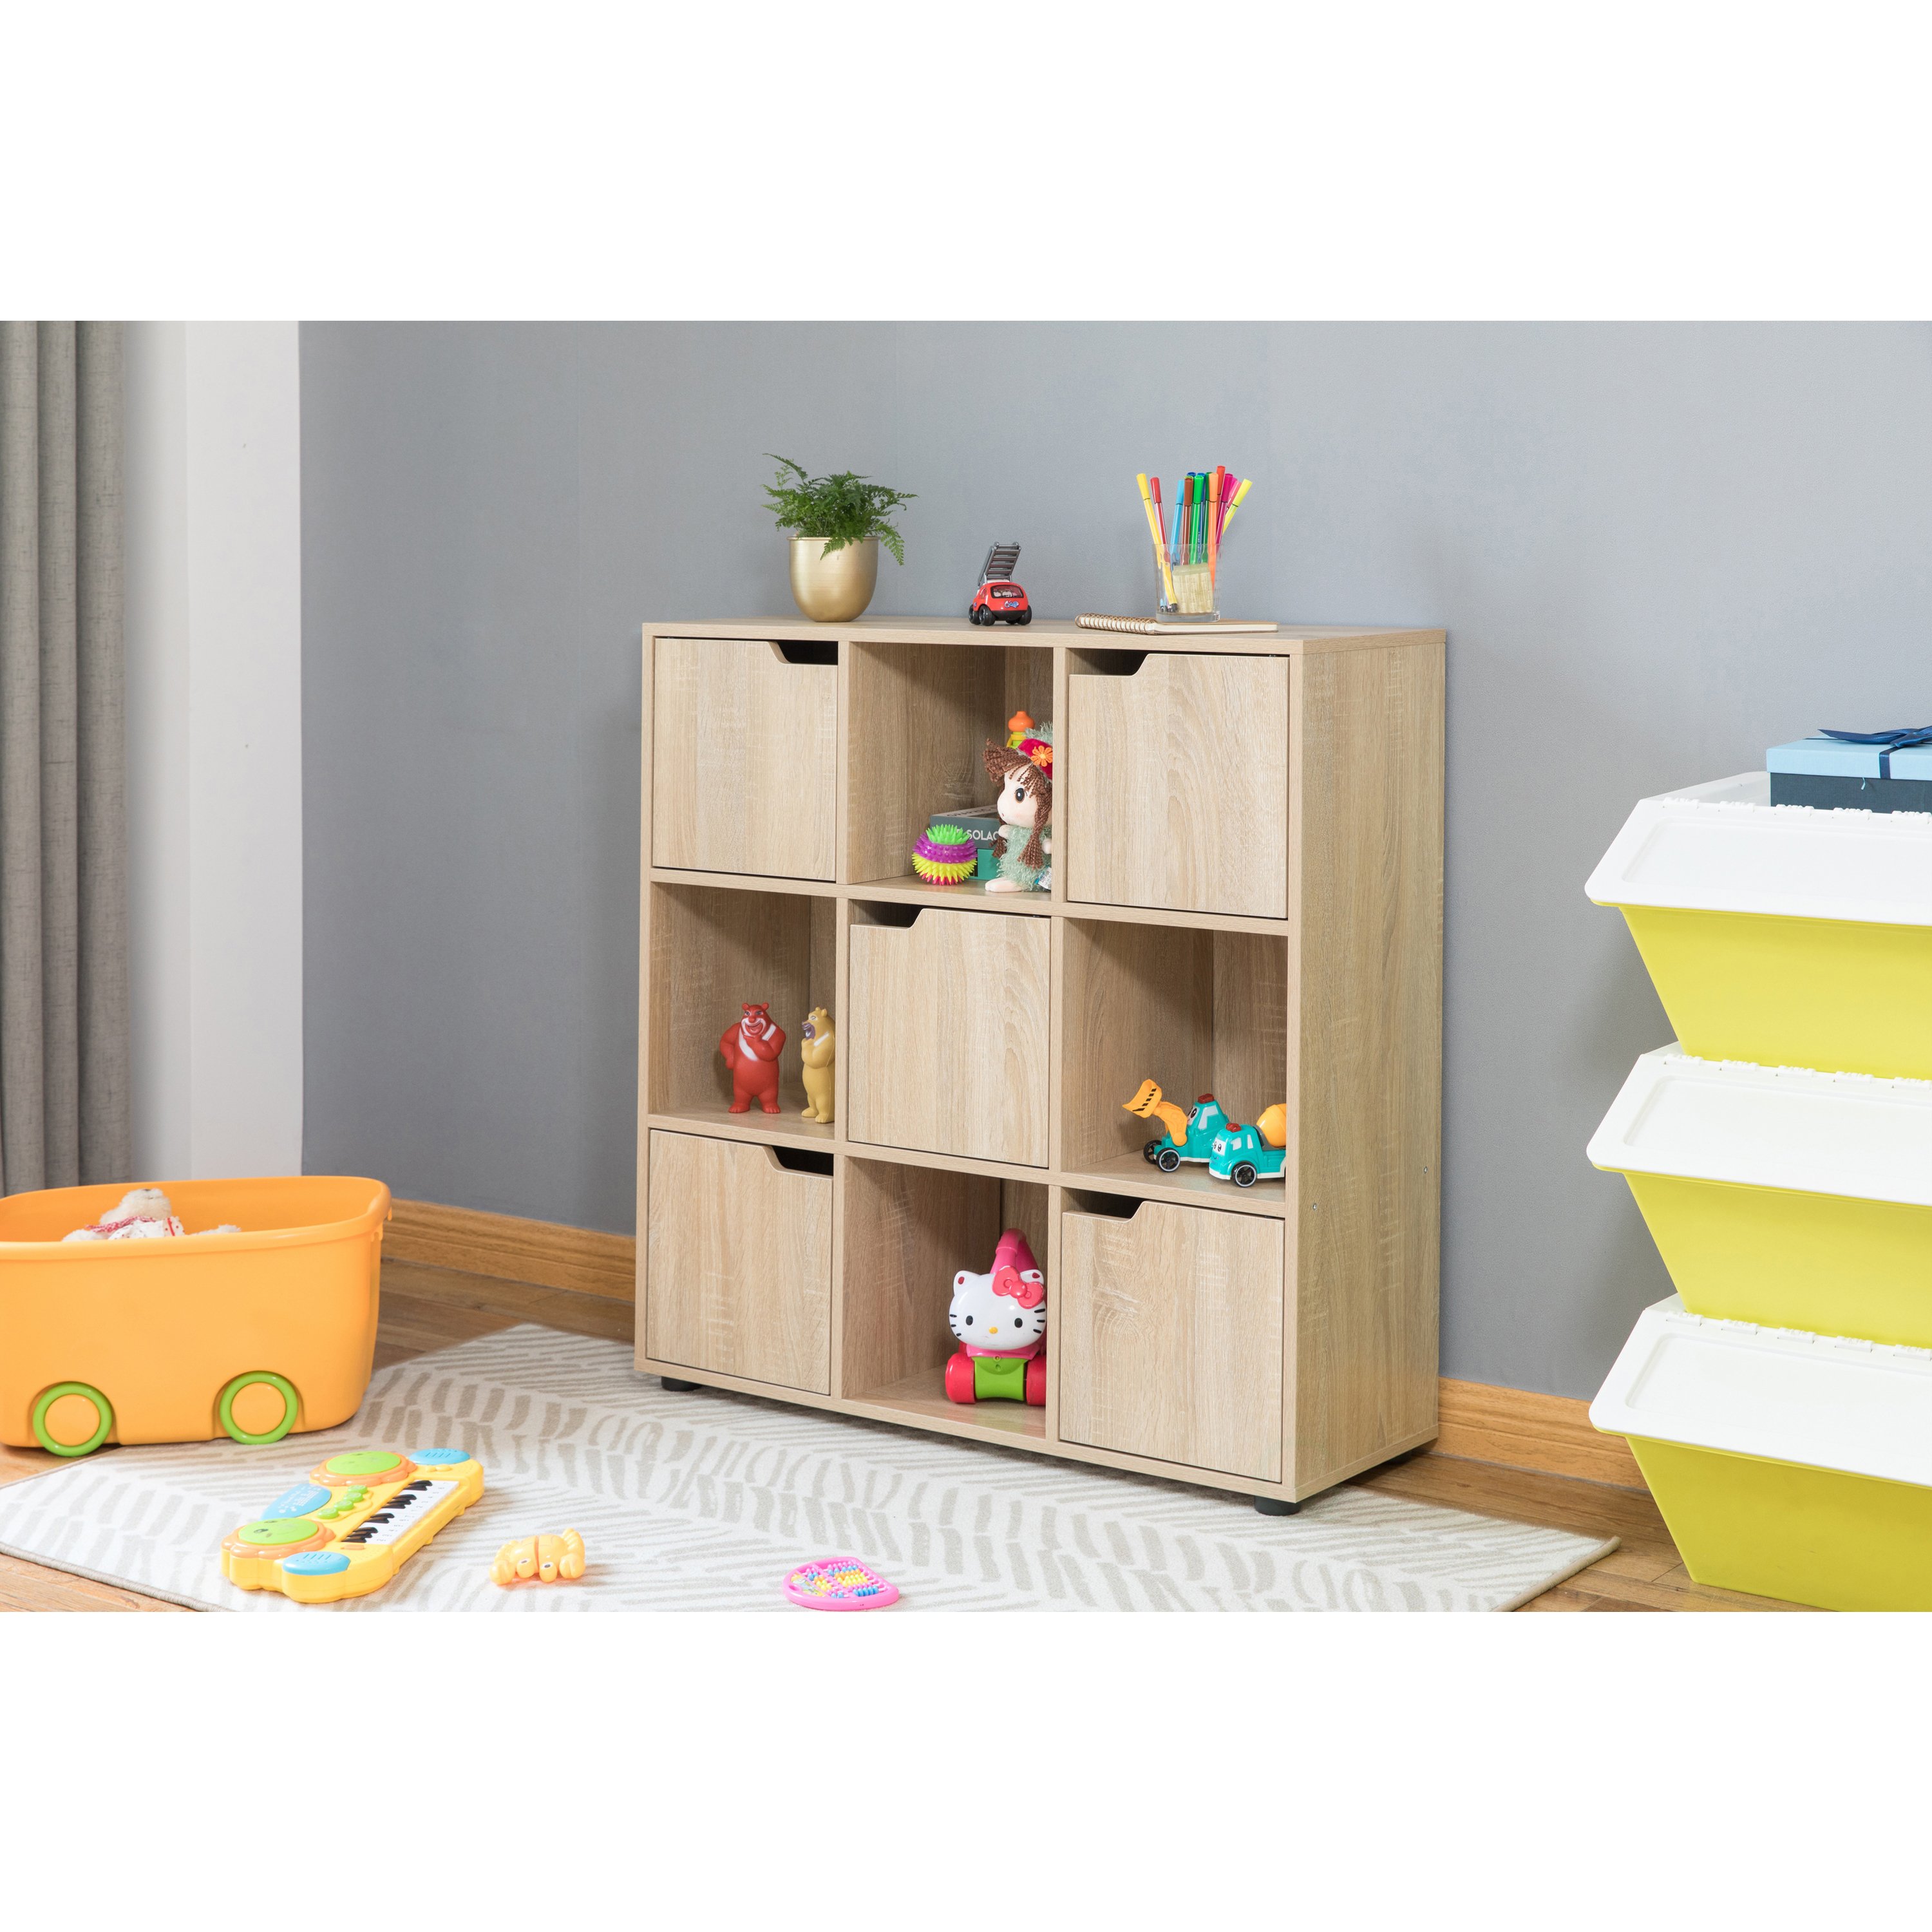 9 Cube Wooden Organizer With 5 Enclosed Doors And 4 Shelves - White